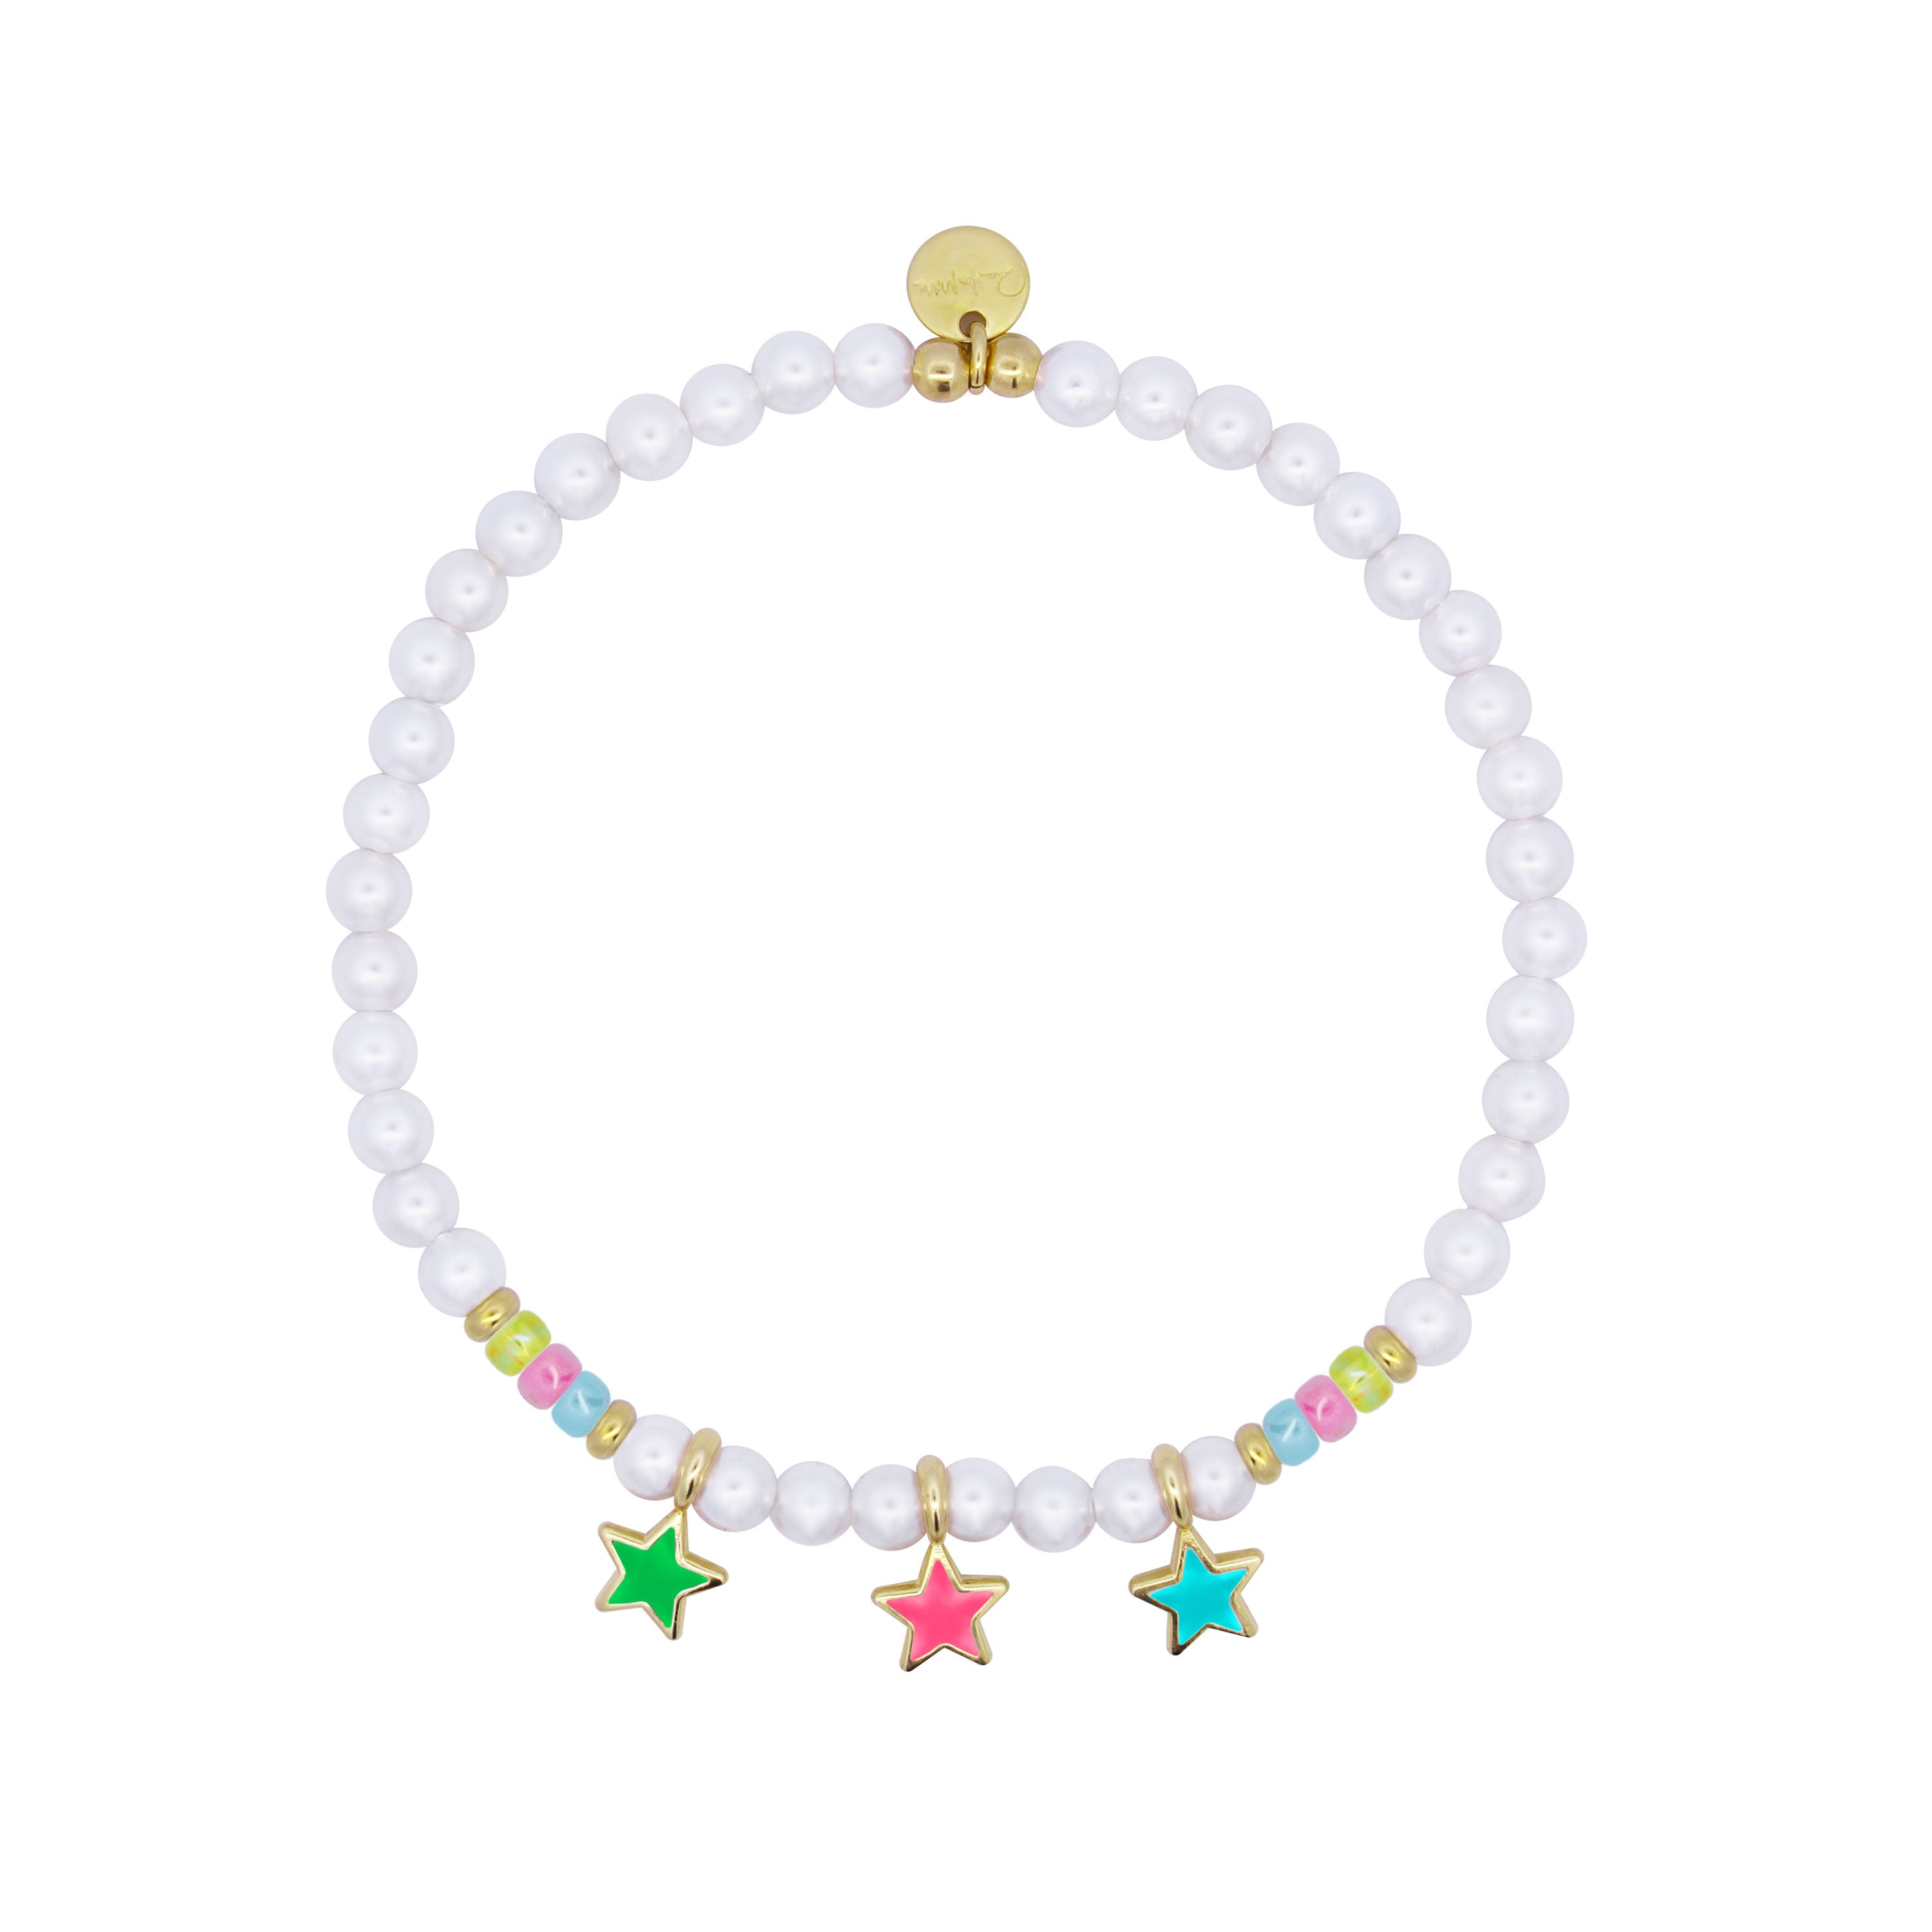 Bracelets - Elastic bracelet with pearls, beads and three stars - ColorFUN - 1 | Rue des Mille